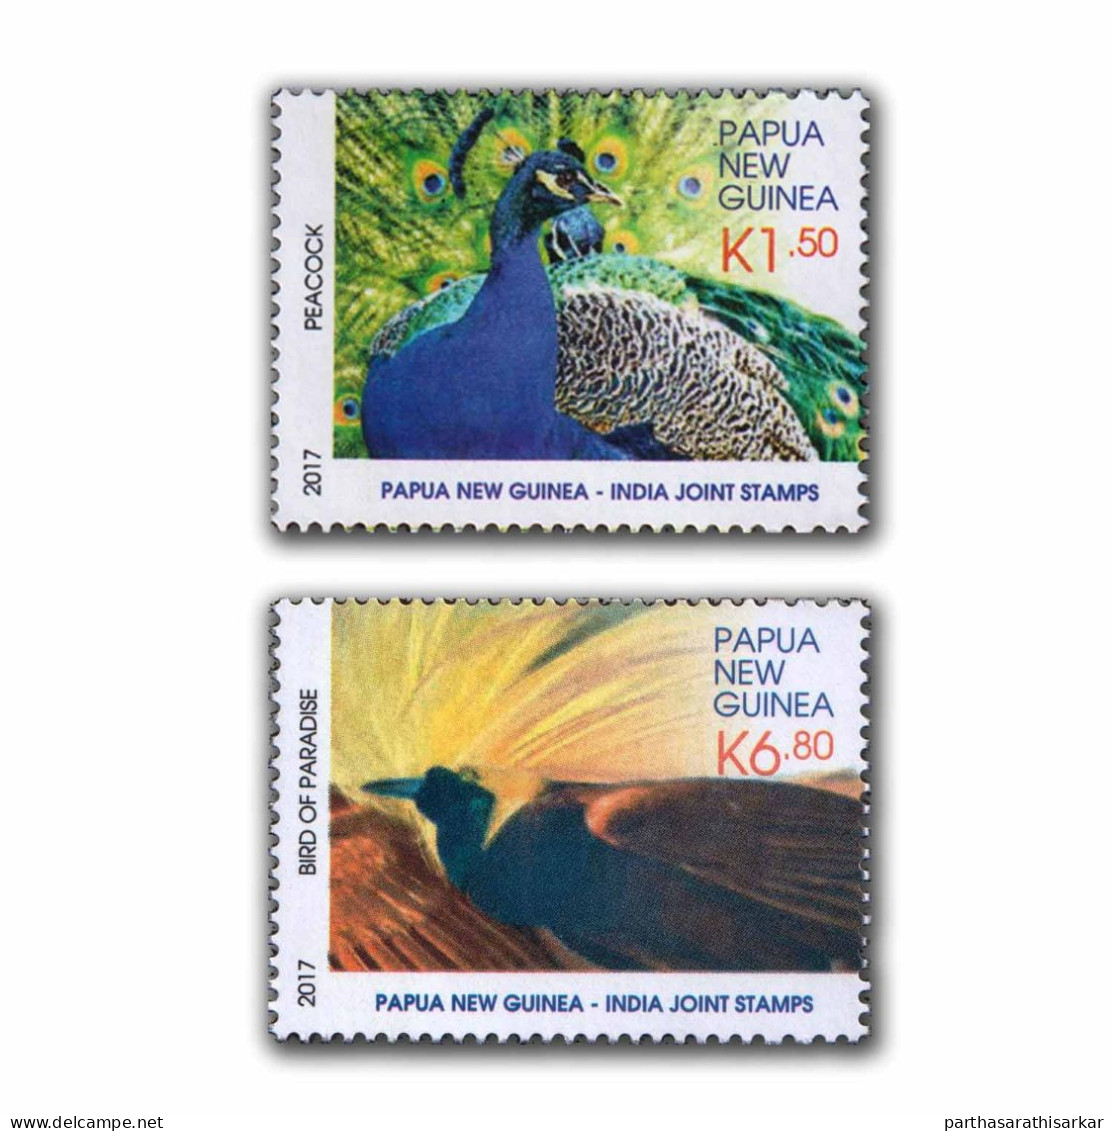 PAPUA NEW GUINEA 2017 JOINT ISSUE WITH INDIA BIRDS COMPLETE SET MNH - Gezamelijke Uitgaven